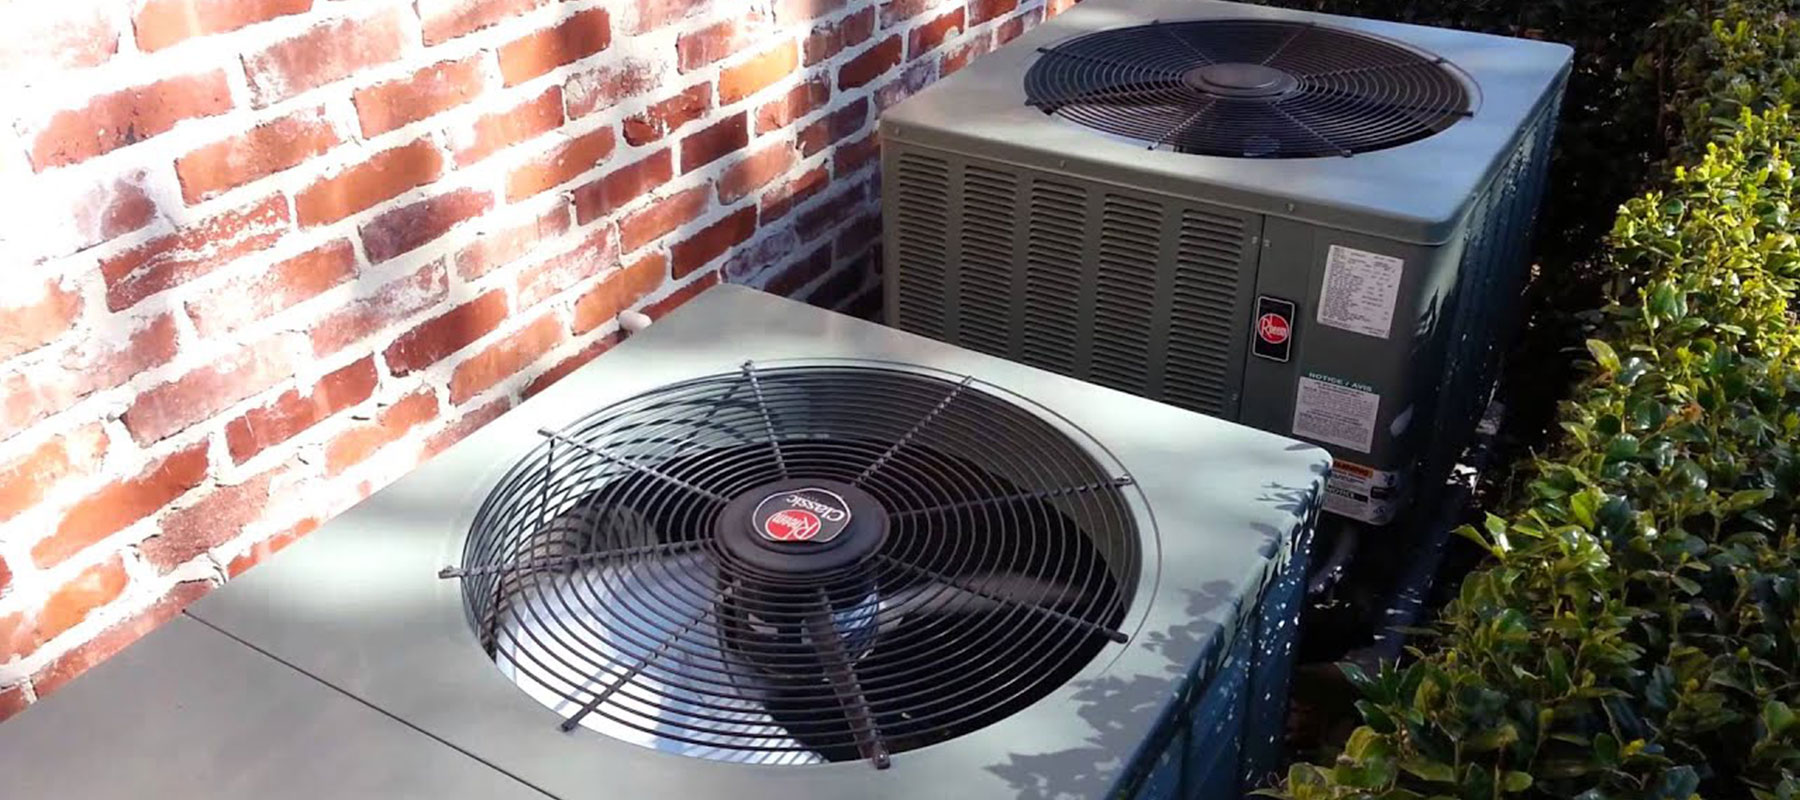 Heating & Cooling Services in Virginia, USA